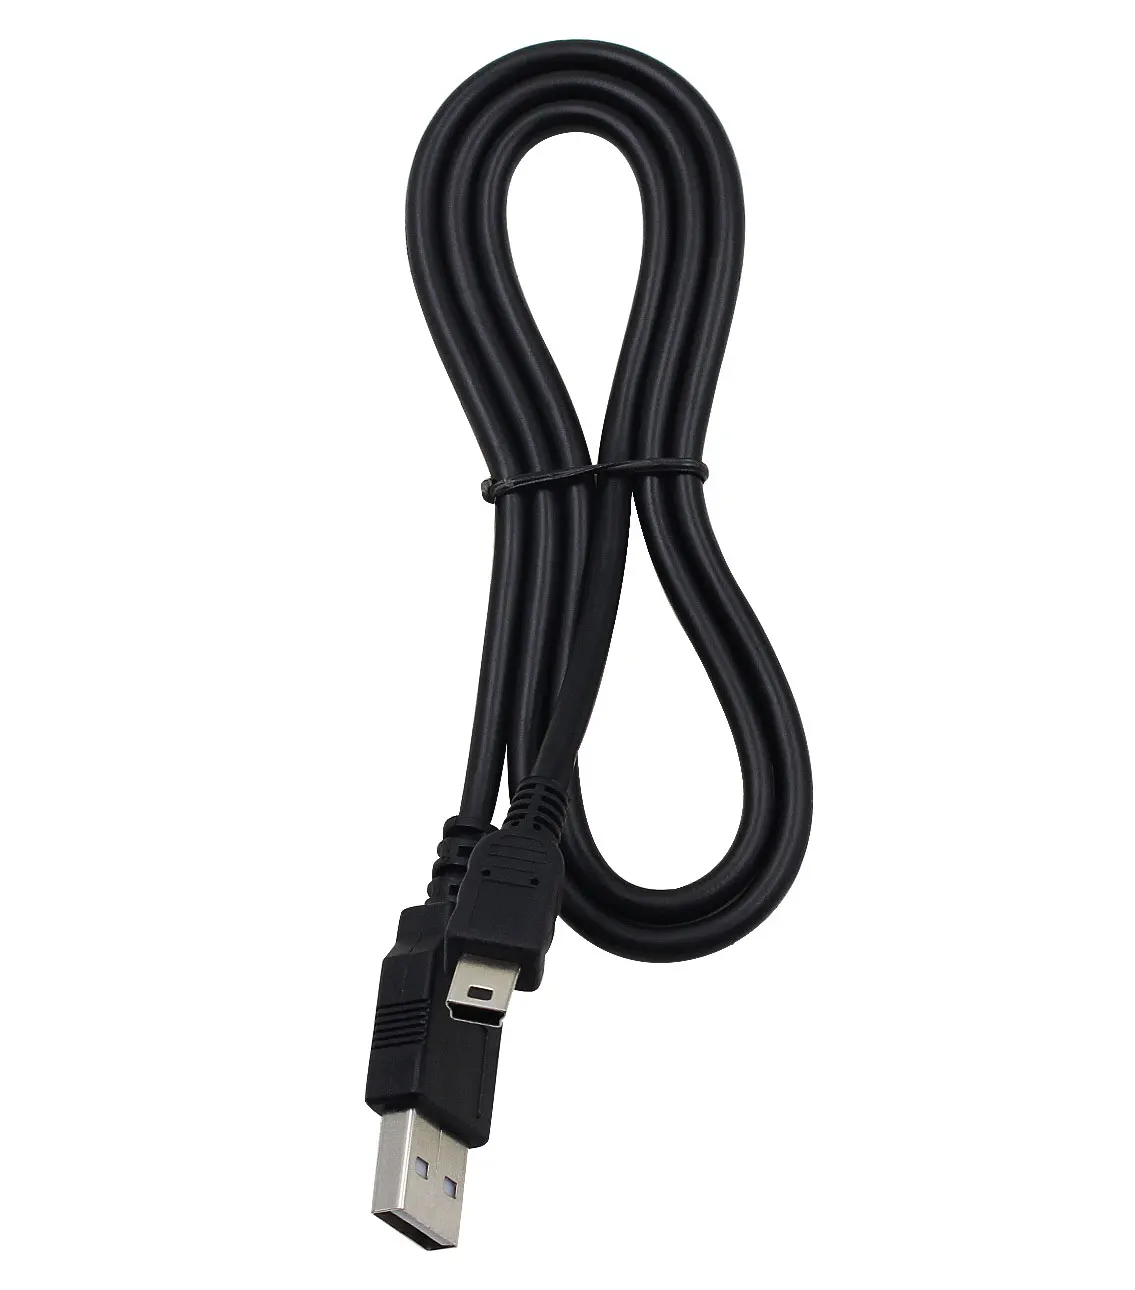 Zoom Handy H1 H2 H4 H4N H5 H6 Portable Handy Digital Audio Recorder Replacement USB Cable Branded Master Cables 